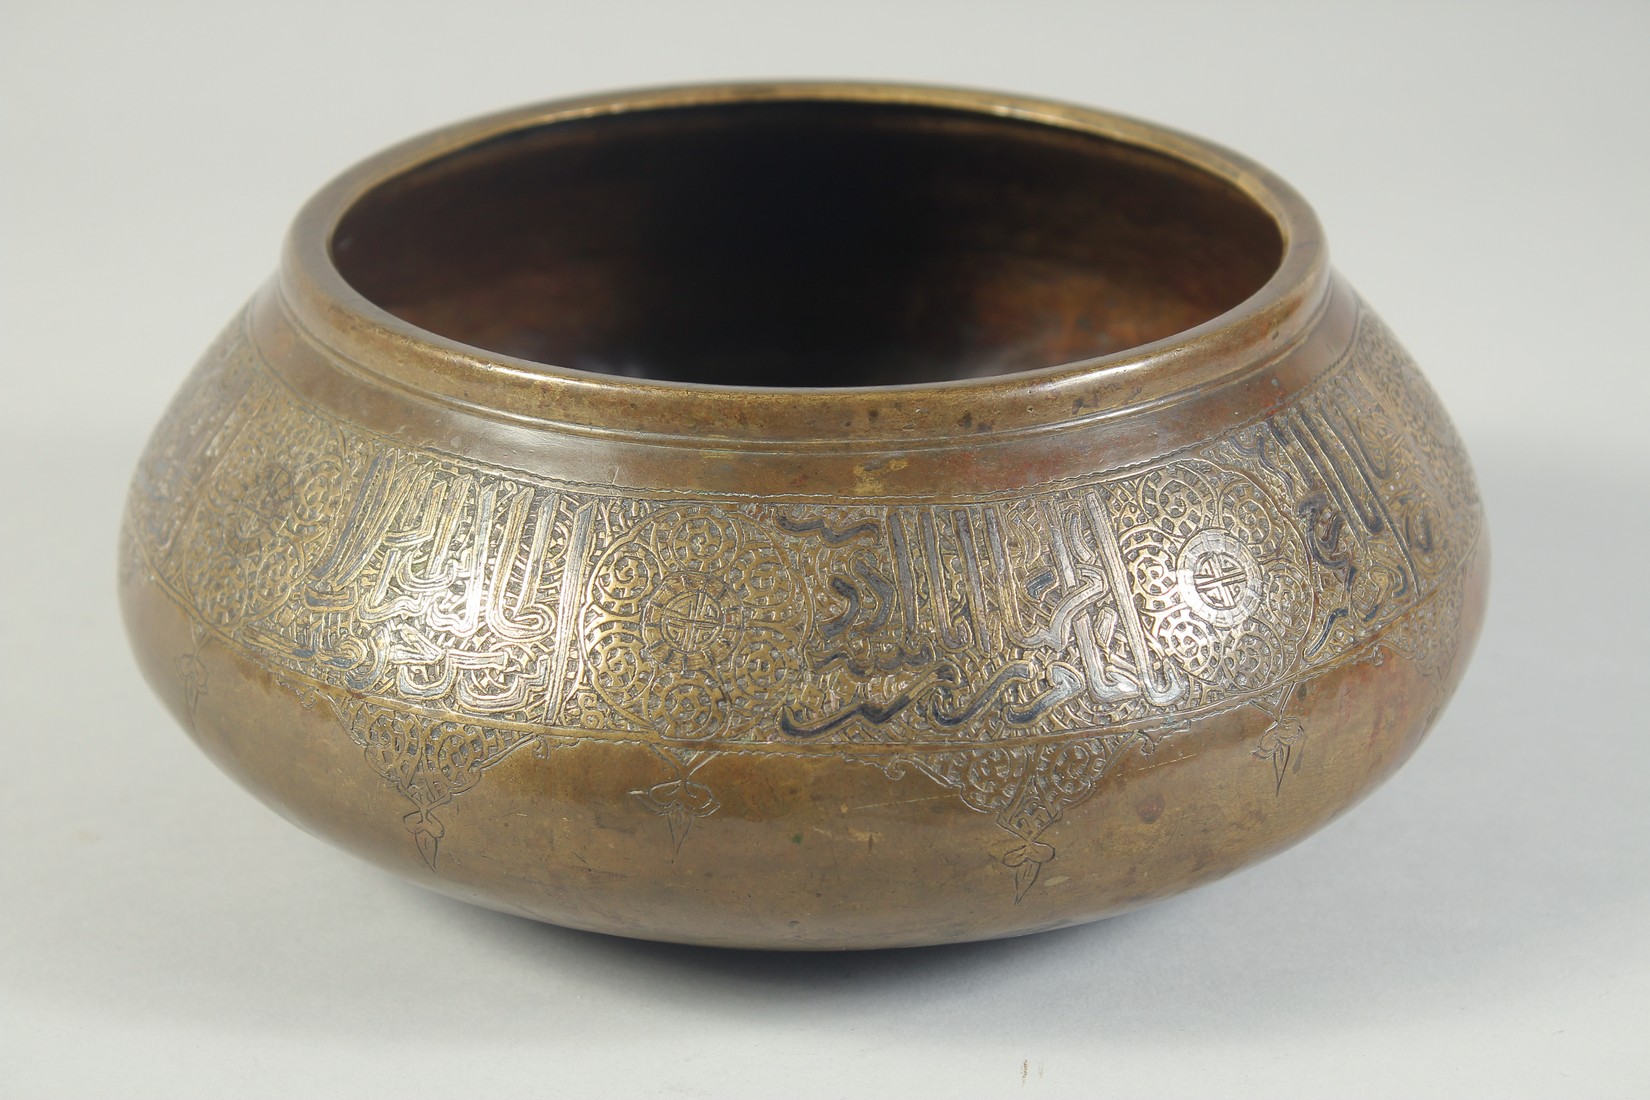 A VERY FINE 14TH CENTURY PERSIAN ILKHANID FARS SILVER INLAID BRASS BOWL, with a band of - Image 3 of 5